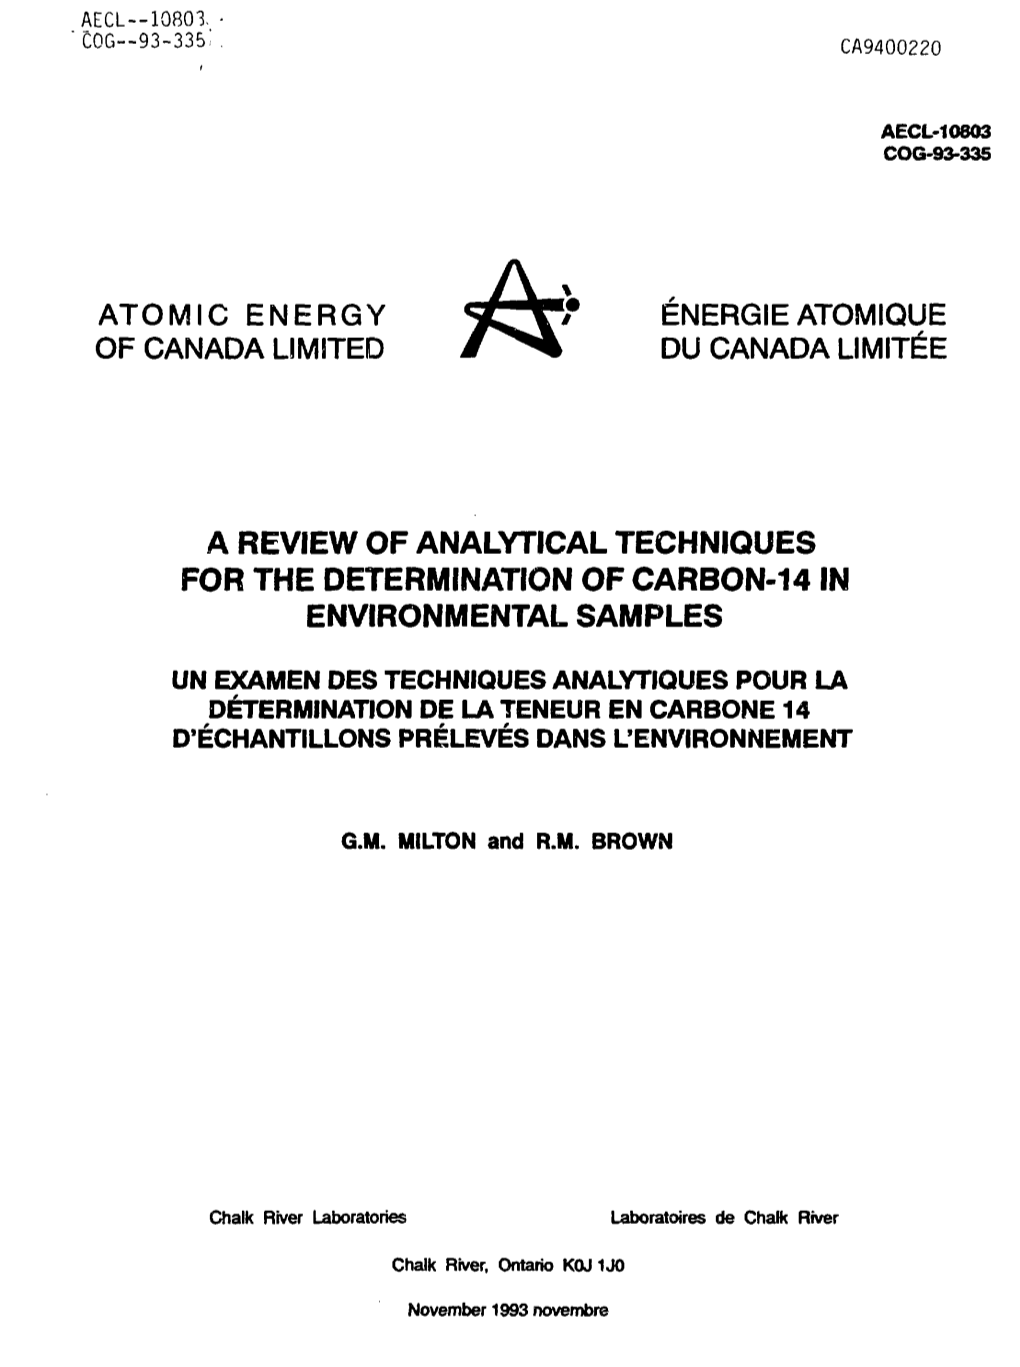 A Review of Analytical Techniques for the Determination of Carbon-14 in Environmental Samples